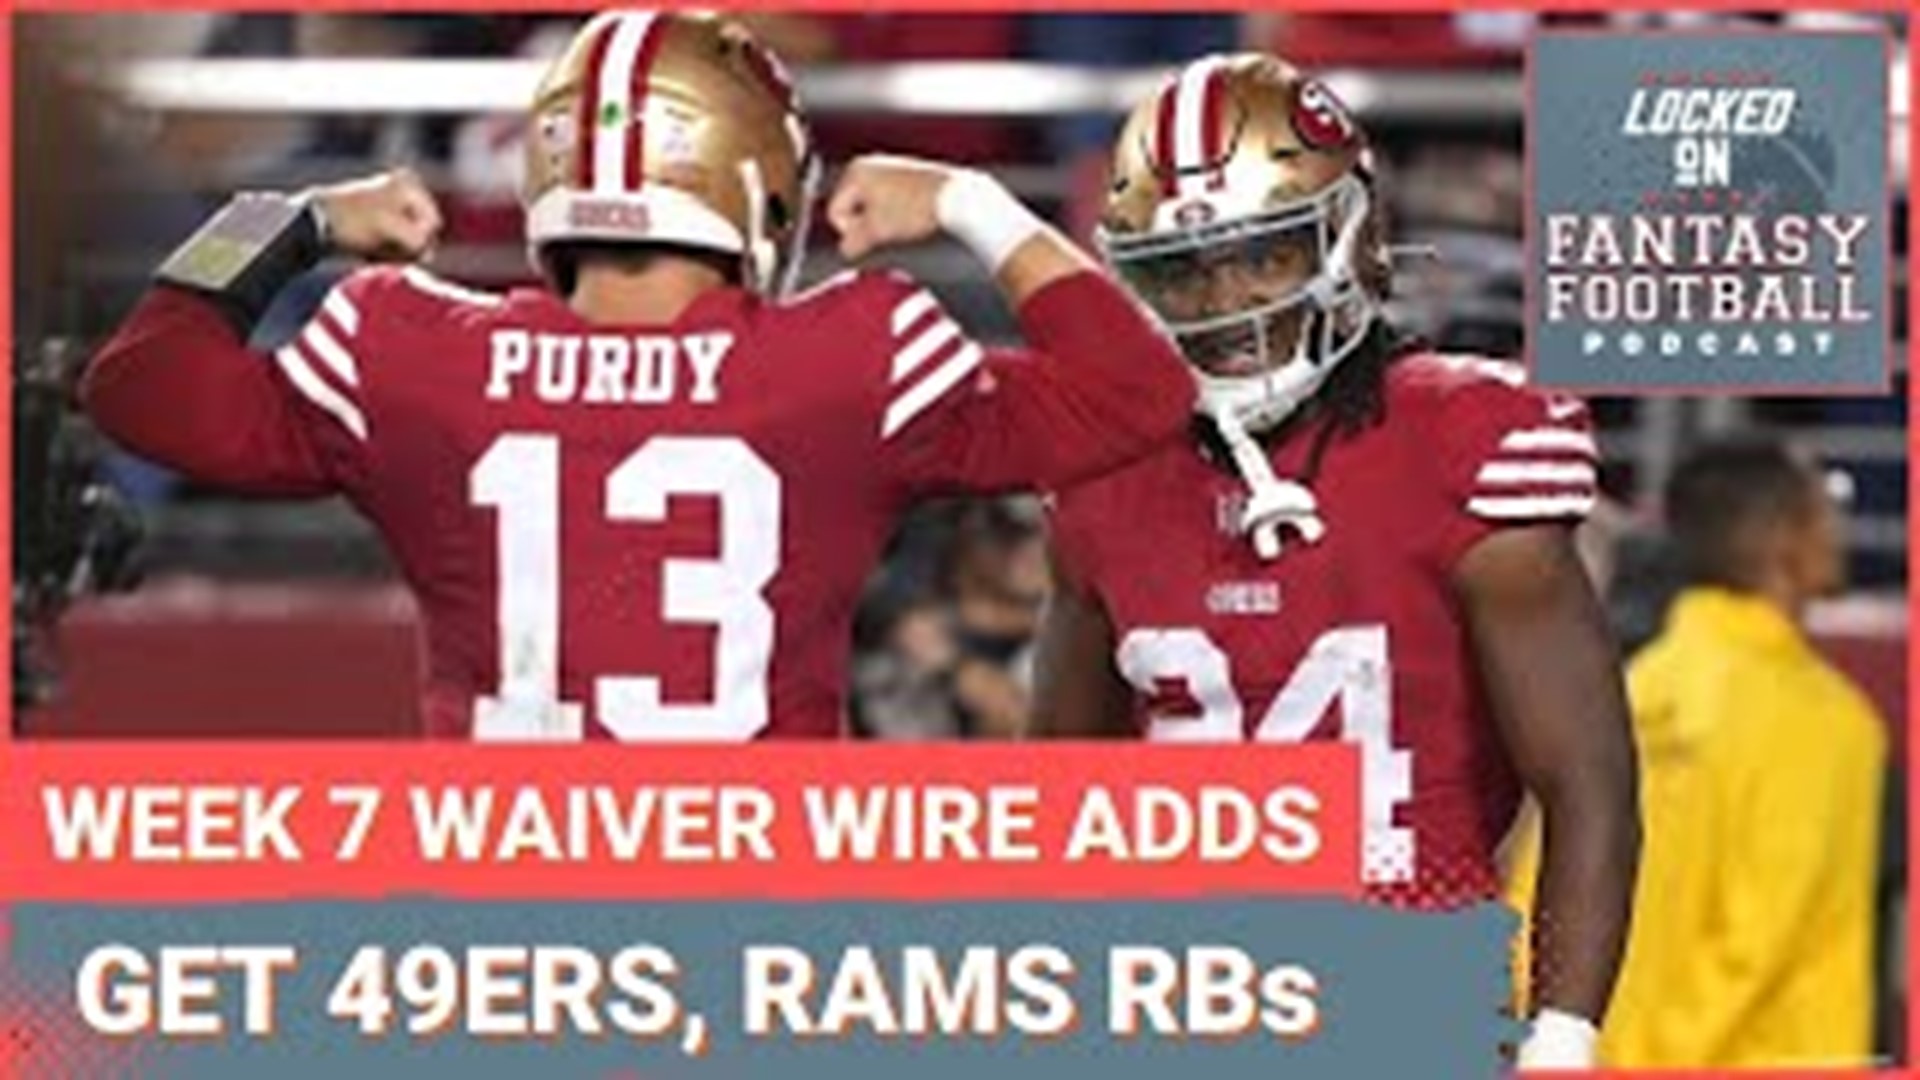 Sporting News' Vinnie Iyer and NFL.com's Michelle Magdziuk break down the best targets for the Week 7 waiver wire in the wake of the latest wave of major injuries